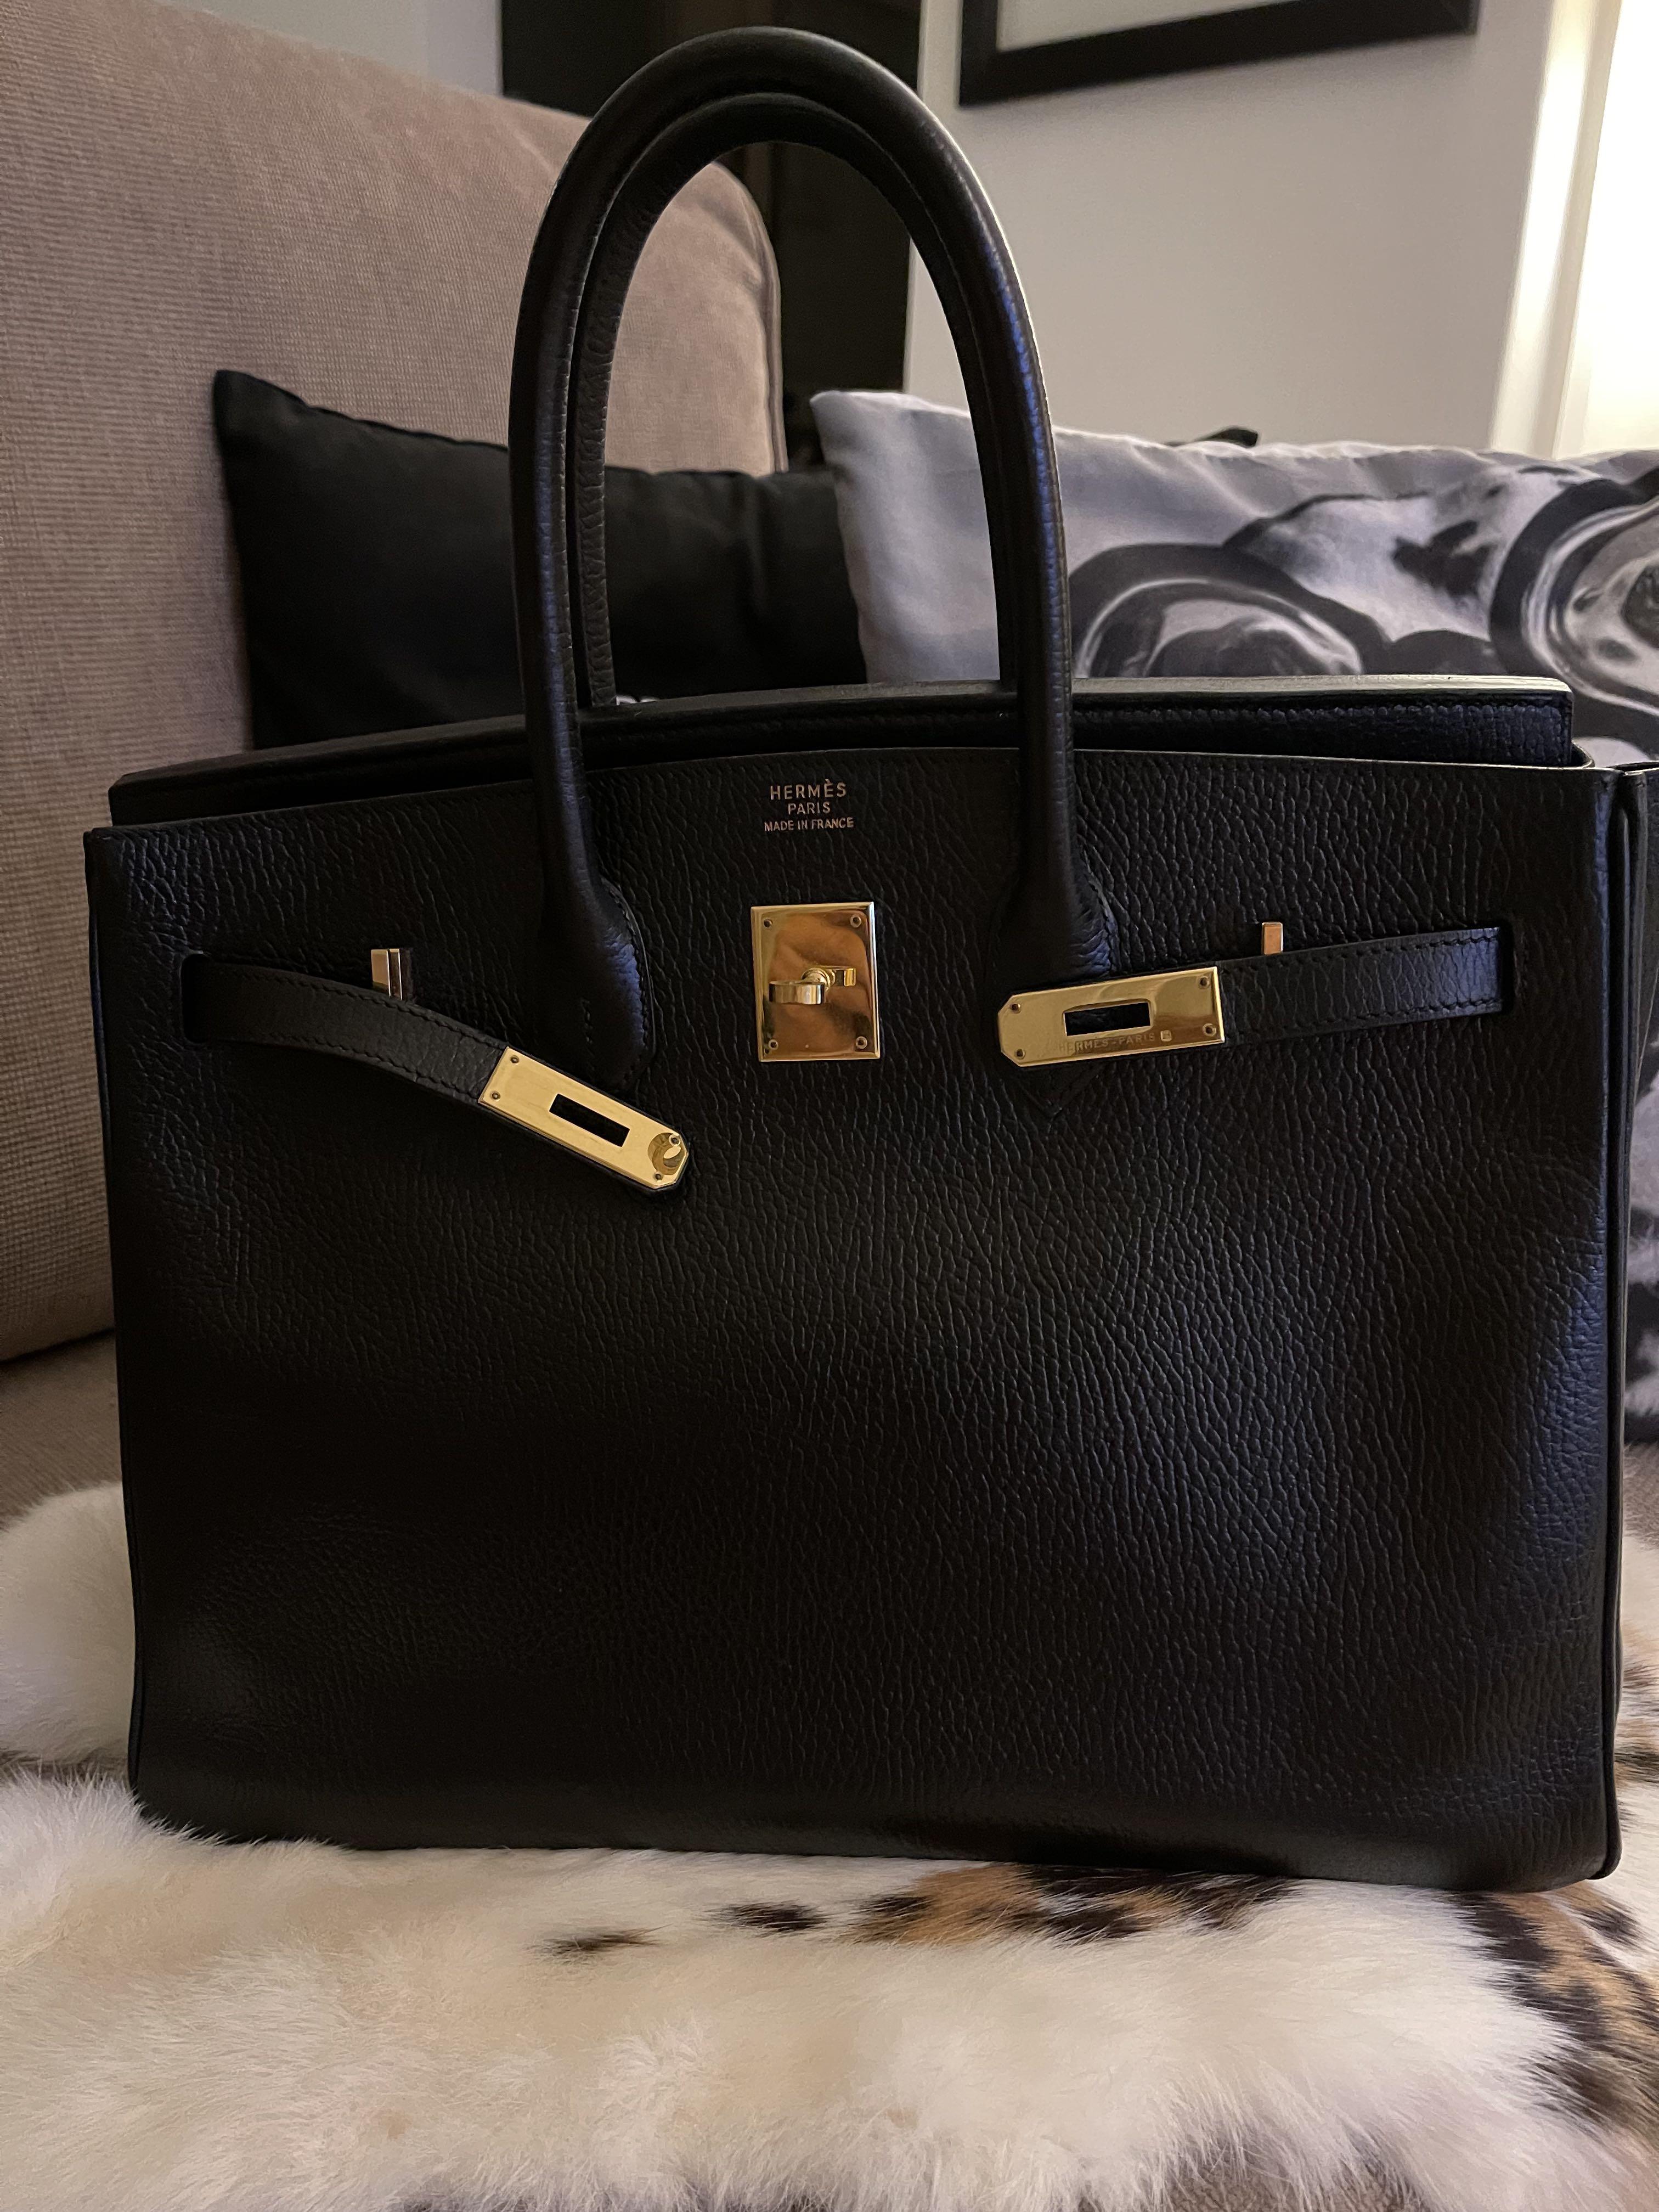 Hermes Birkin 35, etoupe, GHW, best quality and price